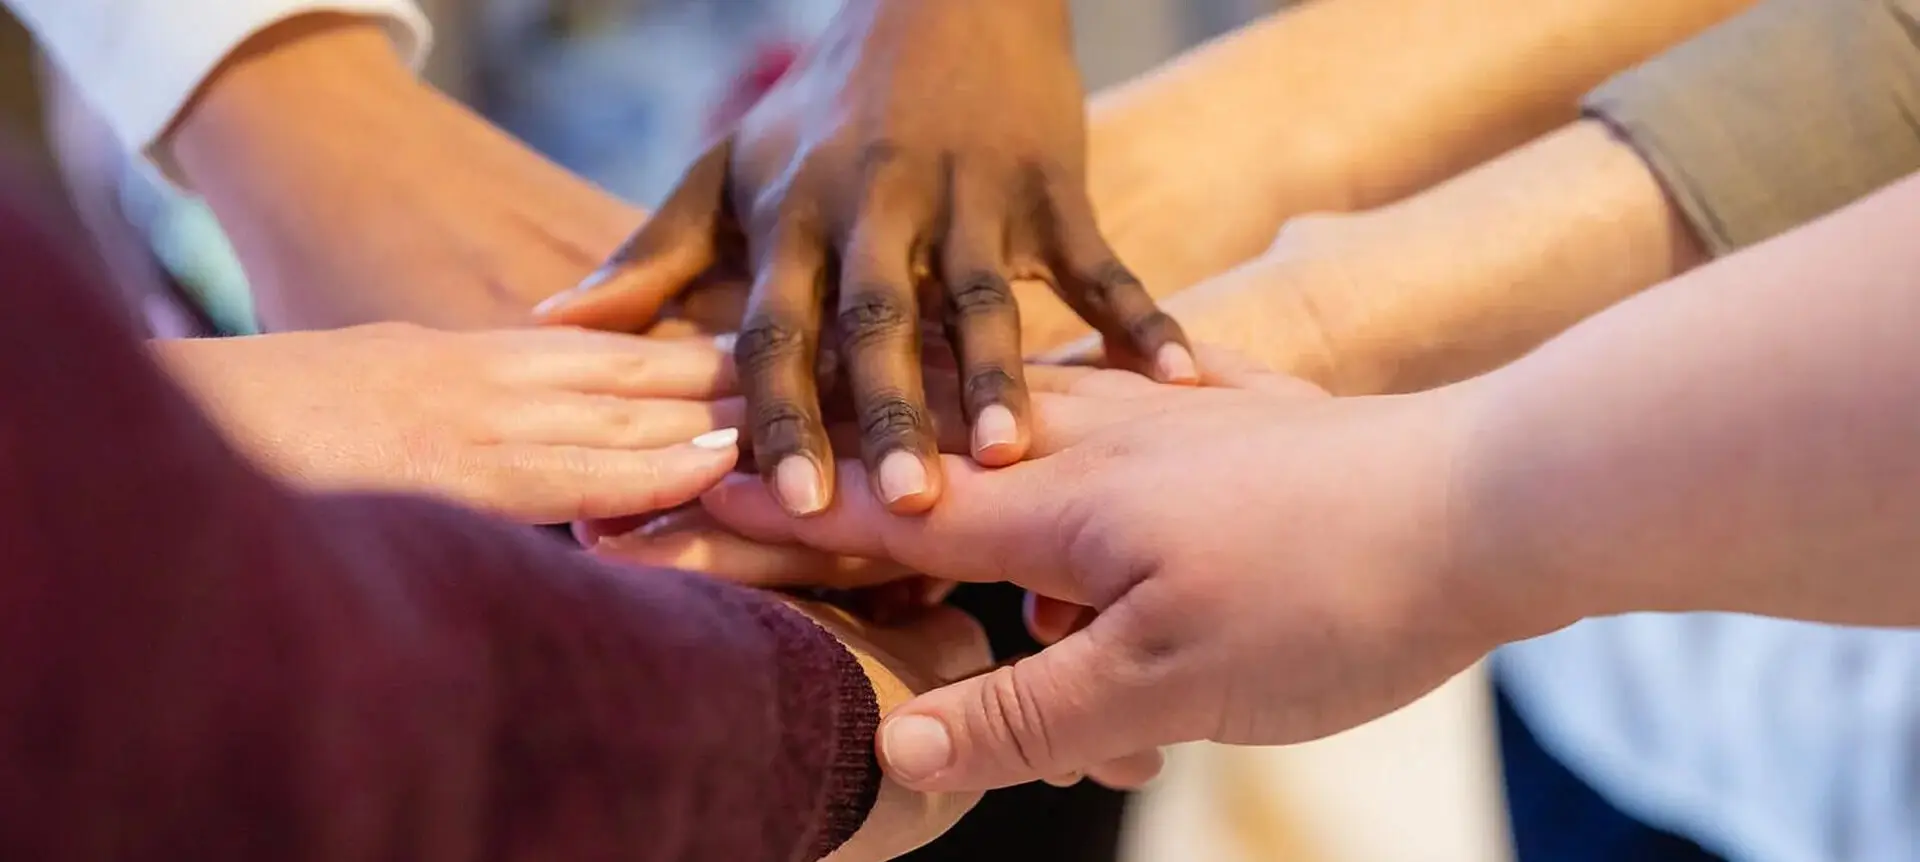 Group of People Joining Their Hands Together